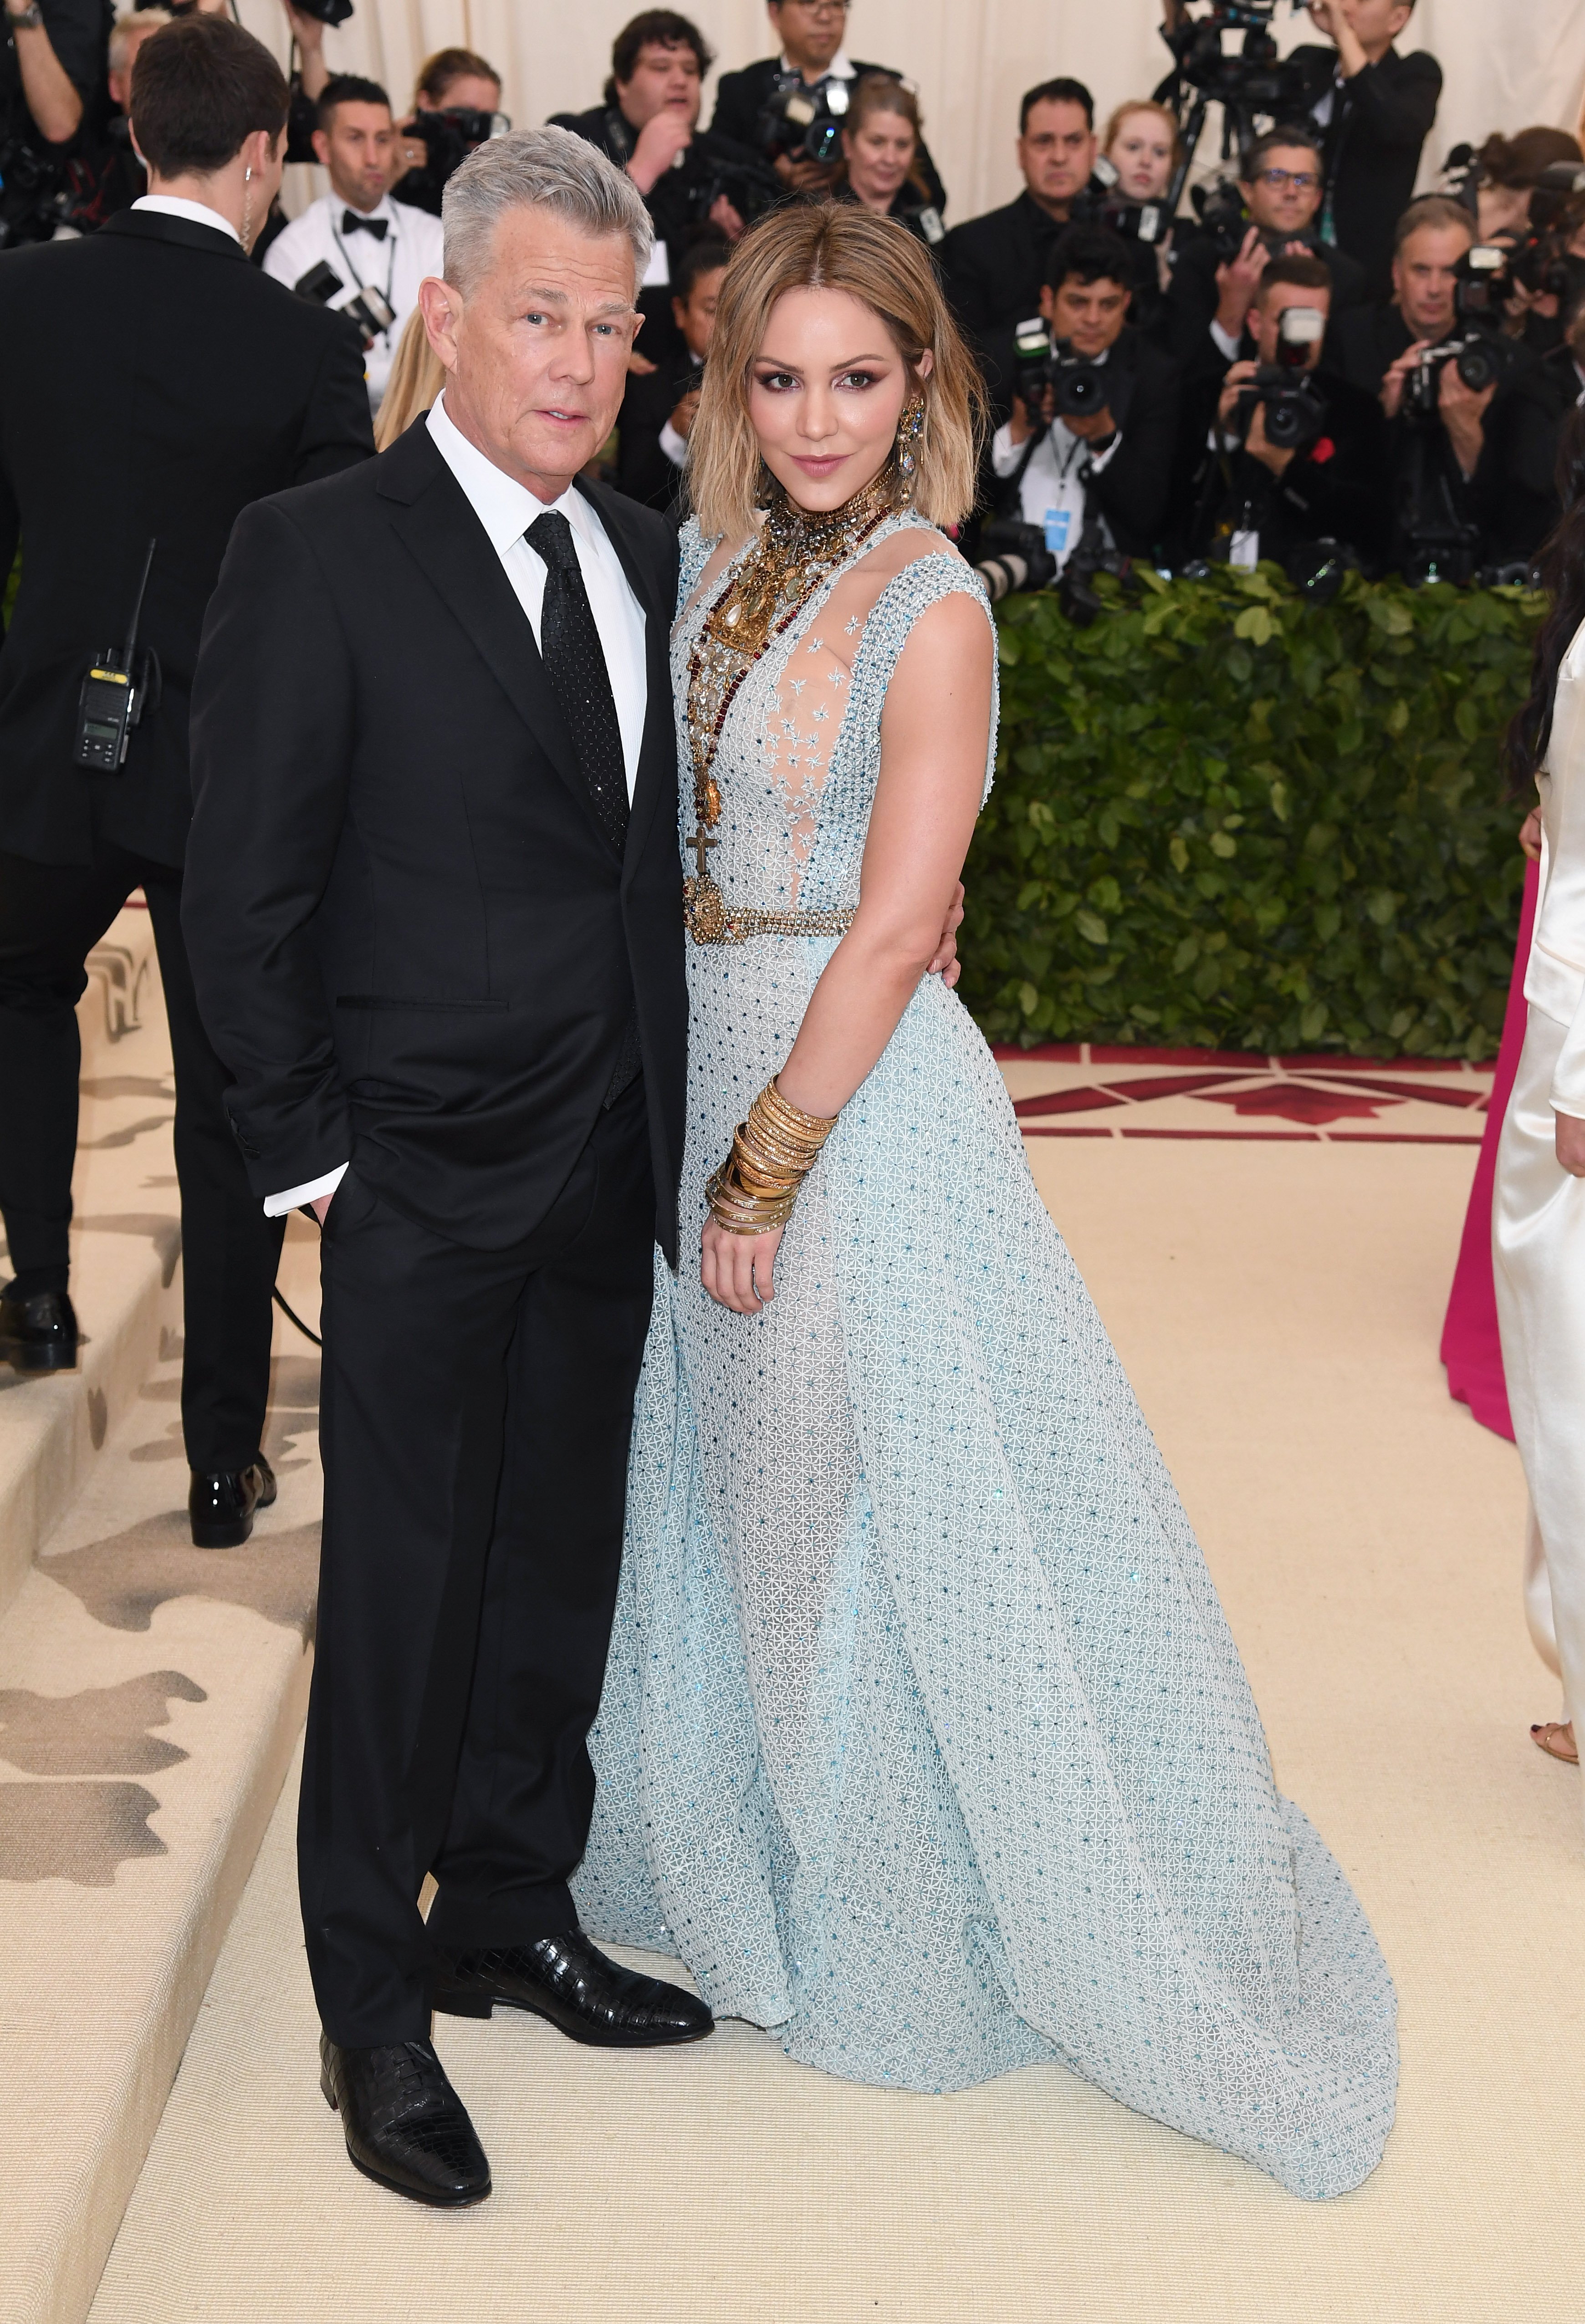 David Foster and Katharine McPhee attend the Heavenly Bodies: Fashion & The Catholic Imagination Costume Institute Gala | Source: Getty Images